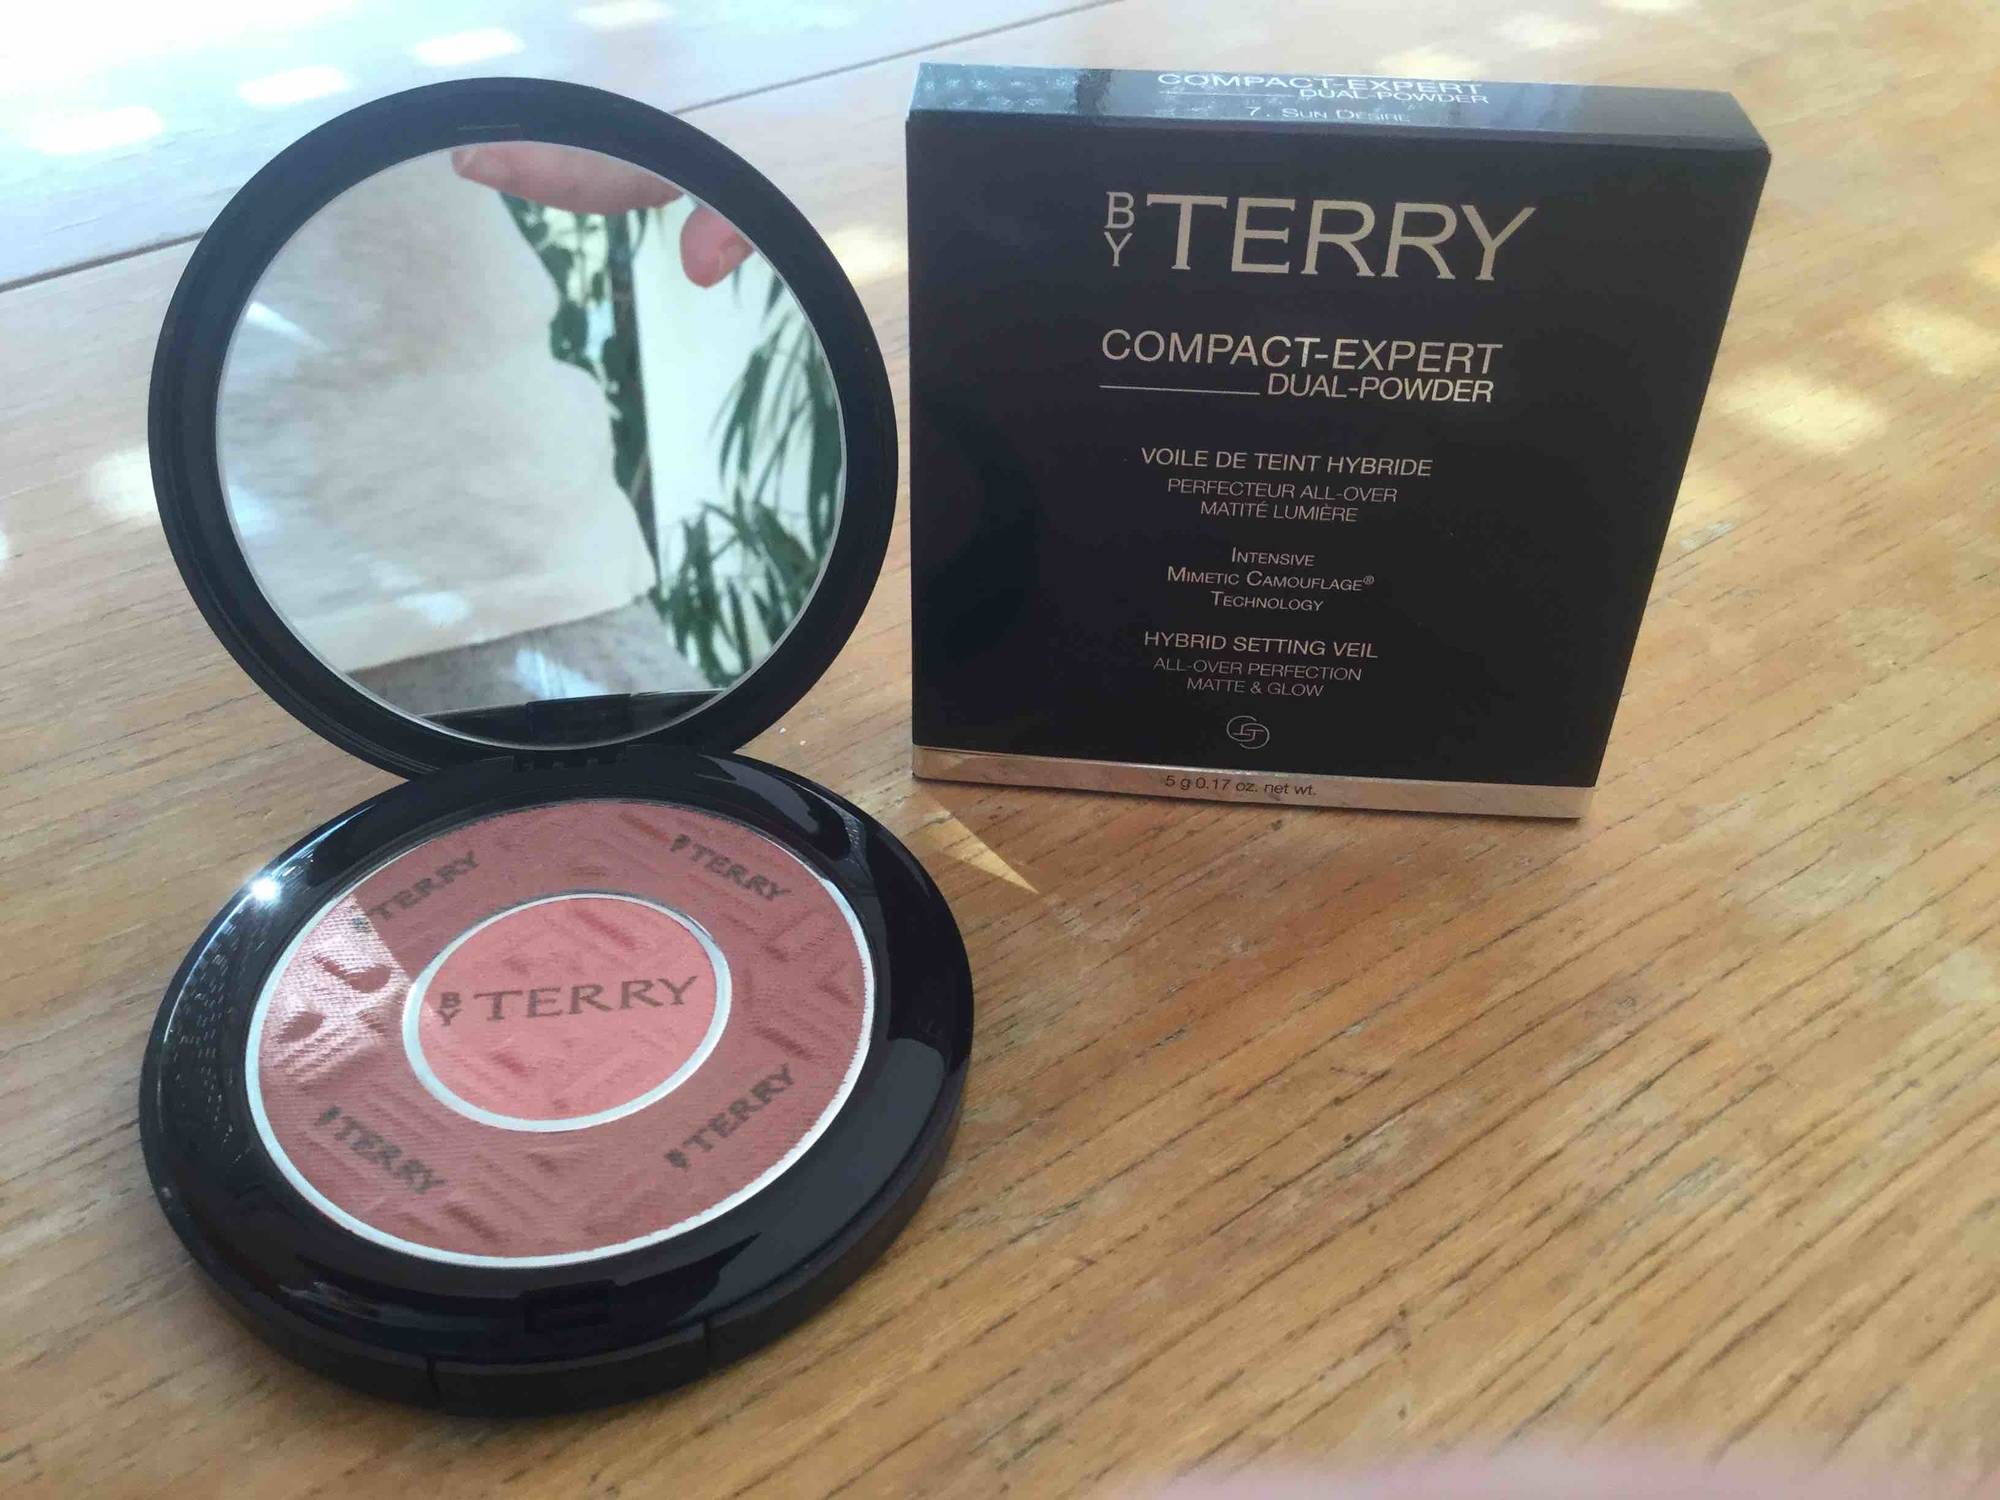 BY TERRY - Compact-expert dual-powder - Voile de teint hybride